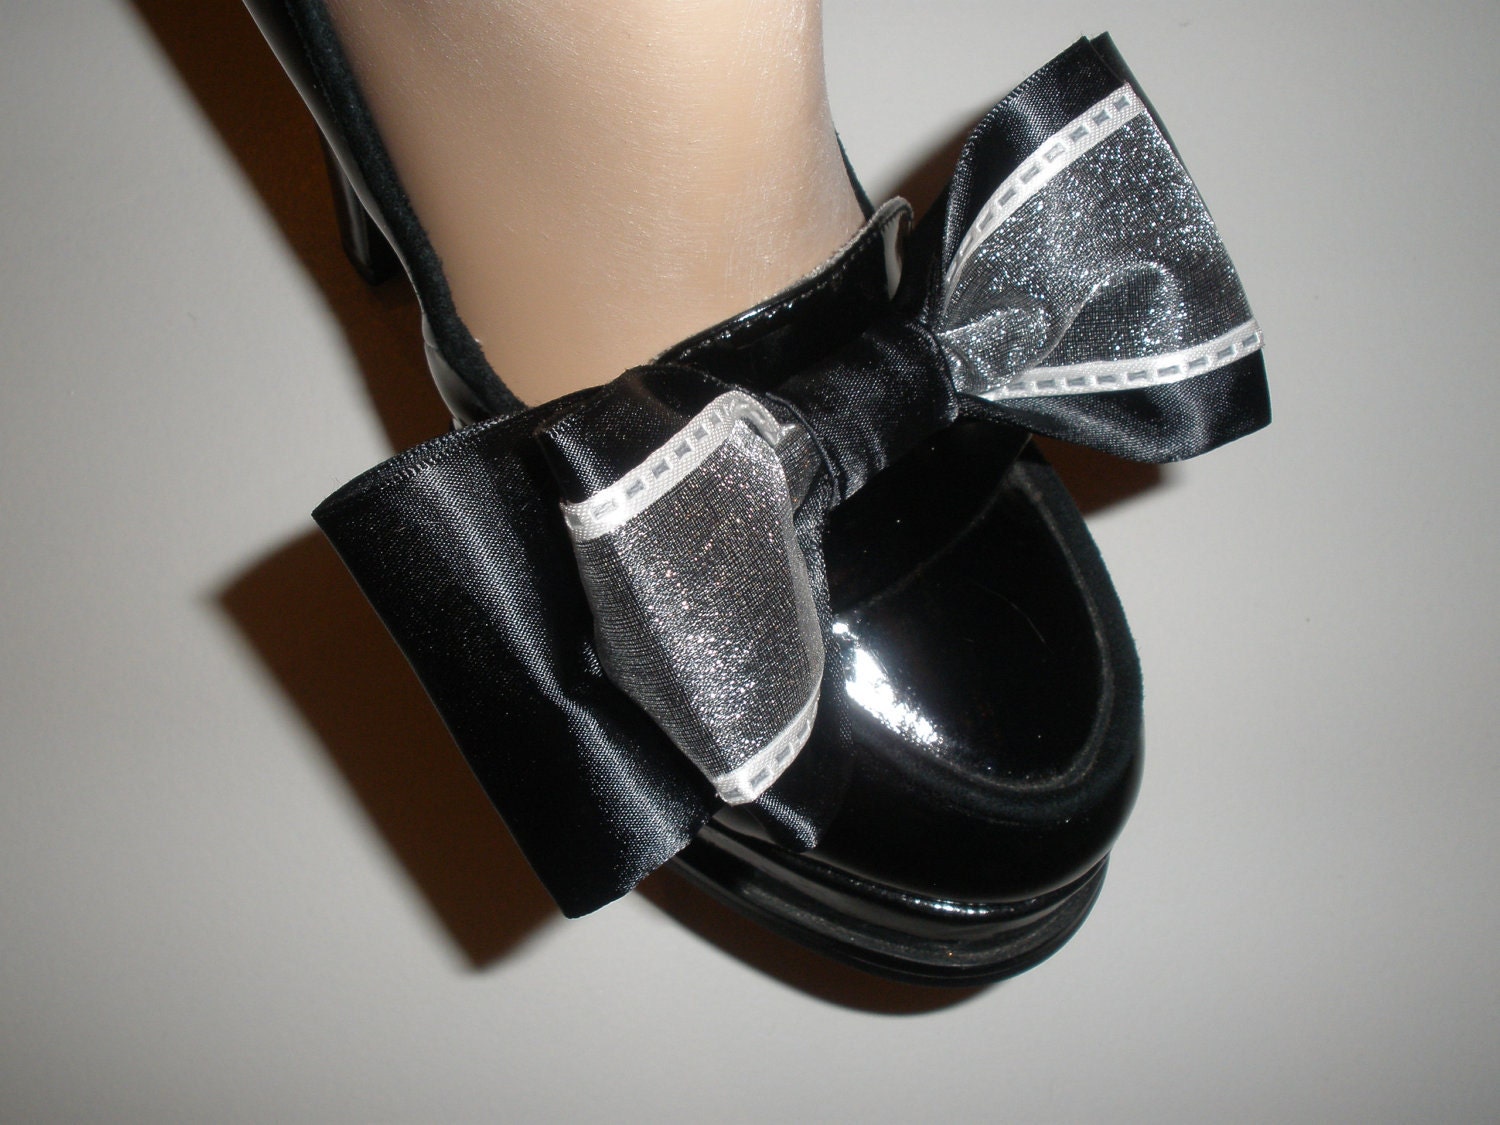 Attractive Black and White Shoe Bow Wrap Accessories for Your High Heel Shoes Not Shoe Clips